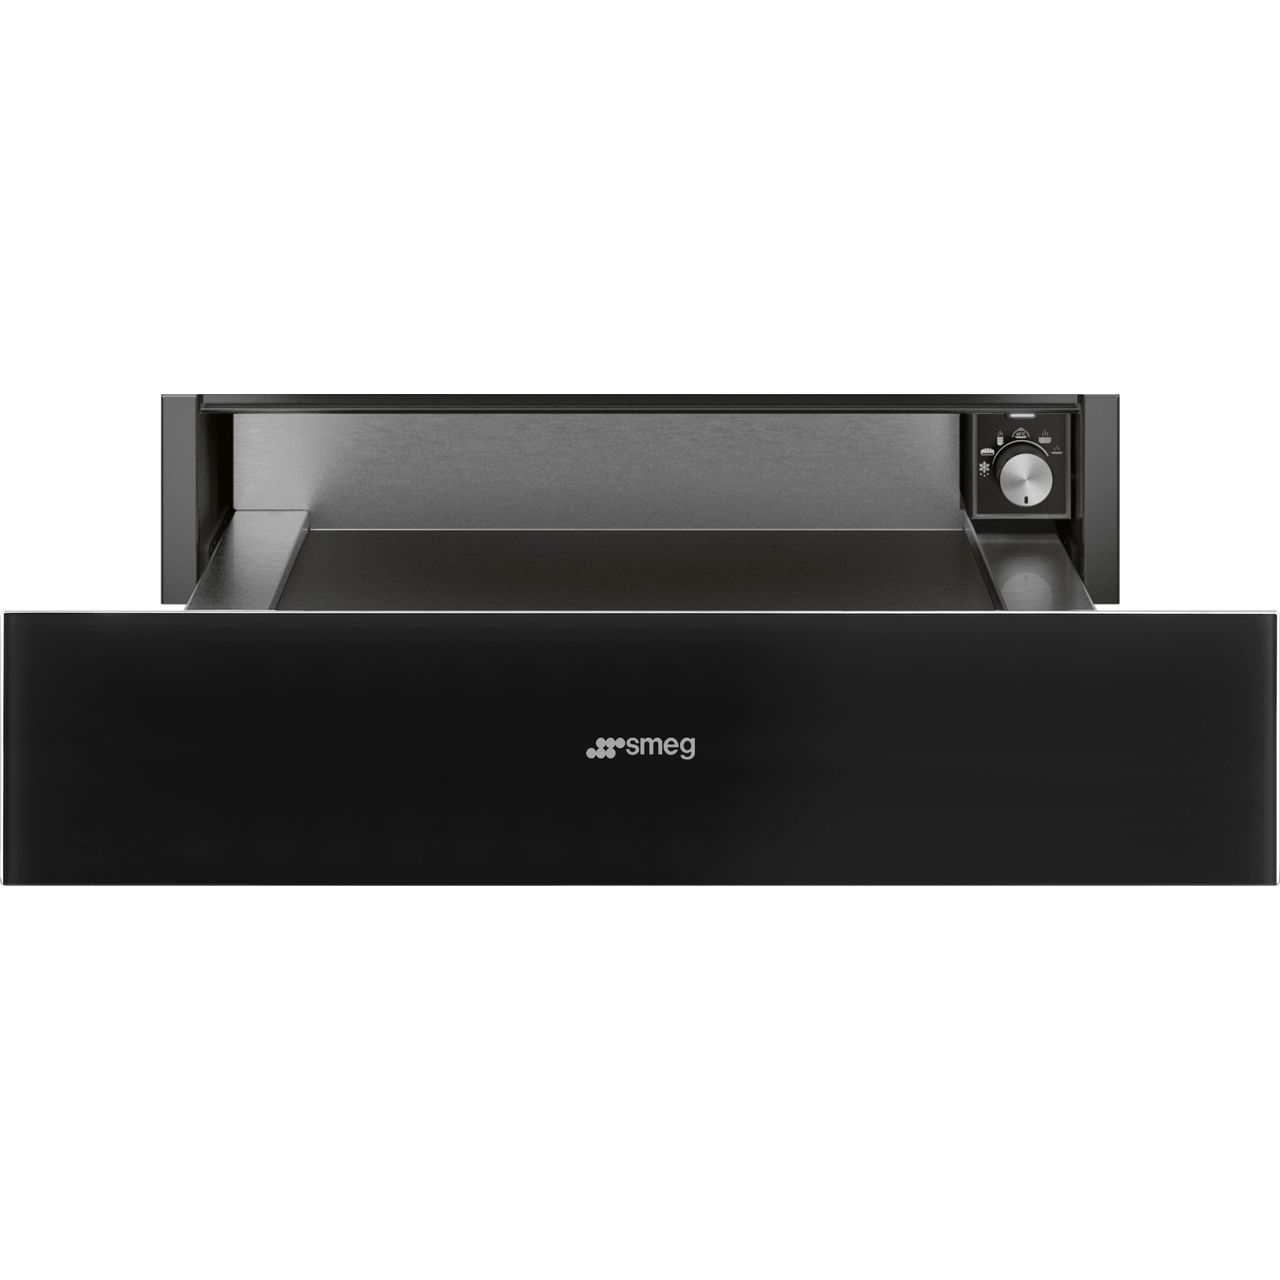 Smeg Linea CPR115N Built In Warming Drawer Review